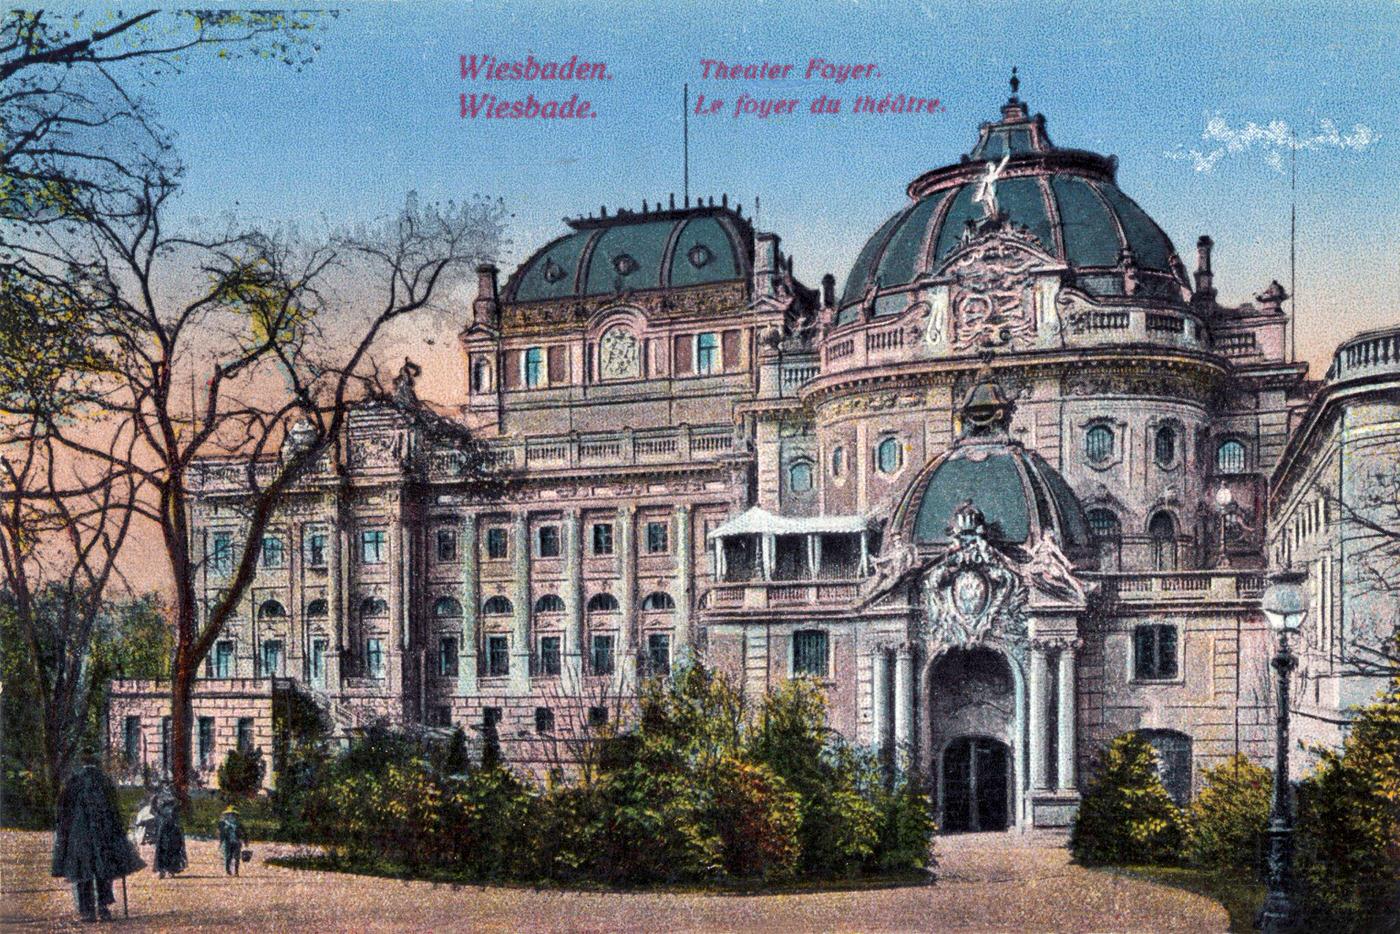 Exterior of the Theater in Wiesbaden, Hesse, Germany, 1890s